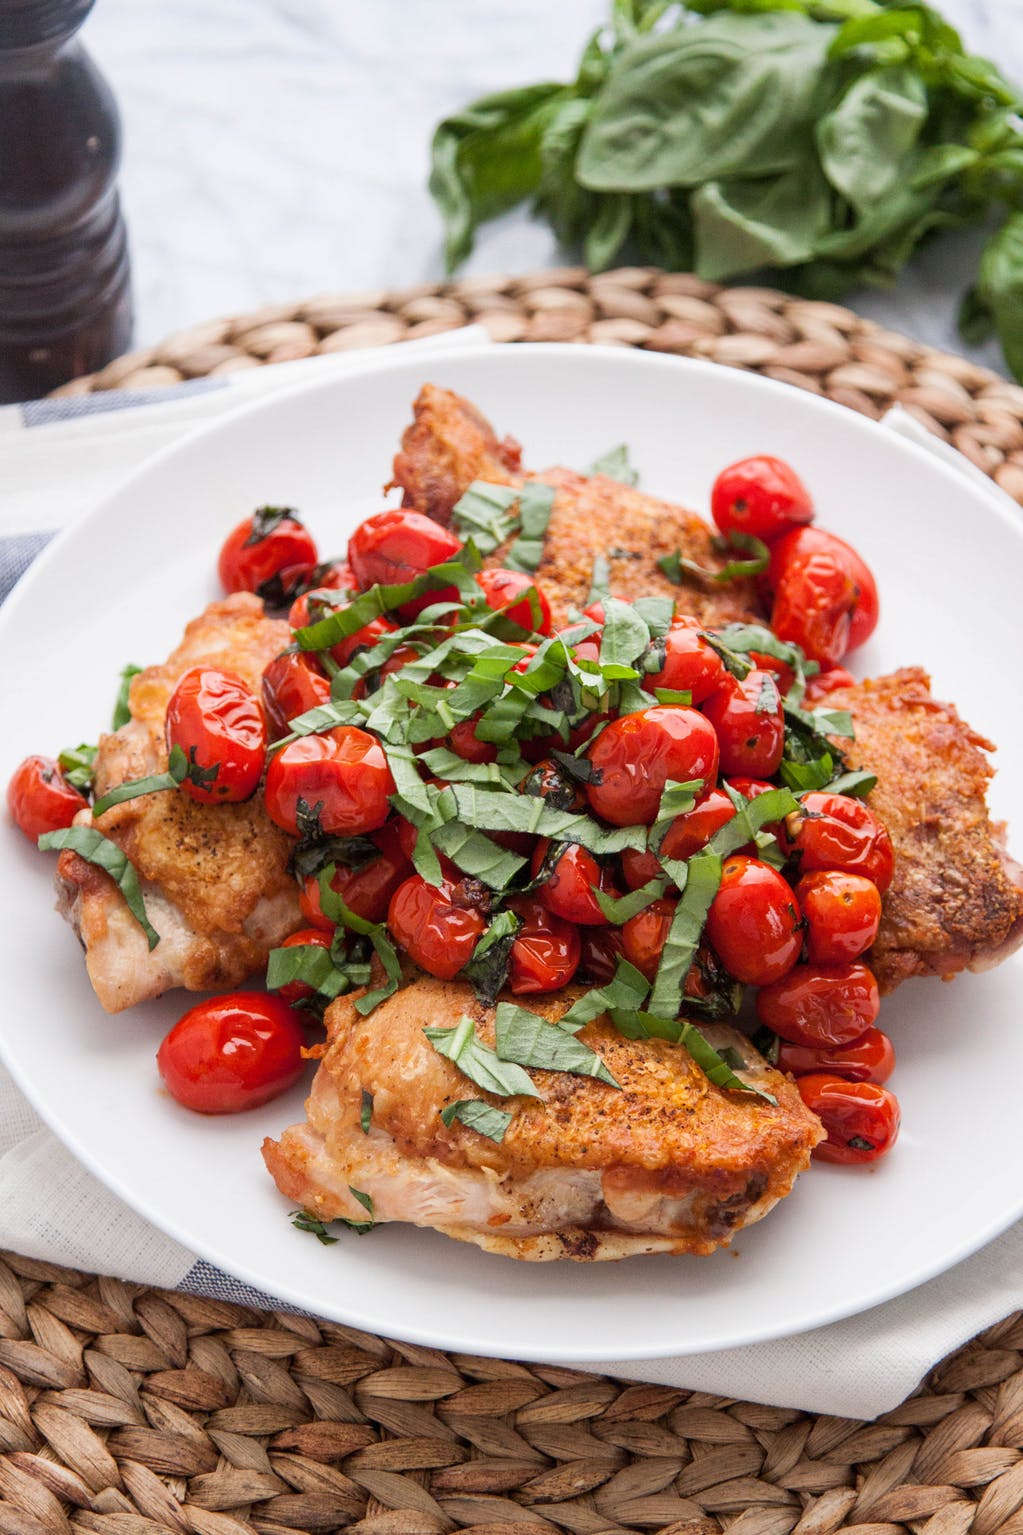 Crispy Pan-Seared Chicken Thighs with Blistered Cherry Tomatoes